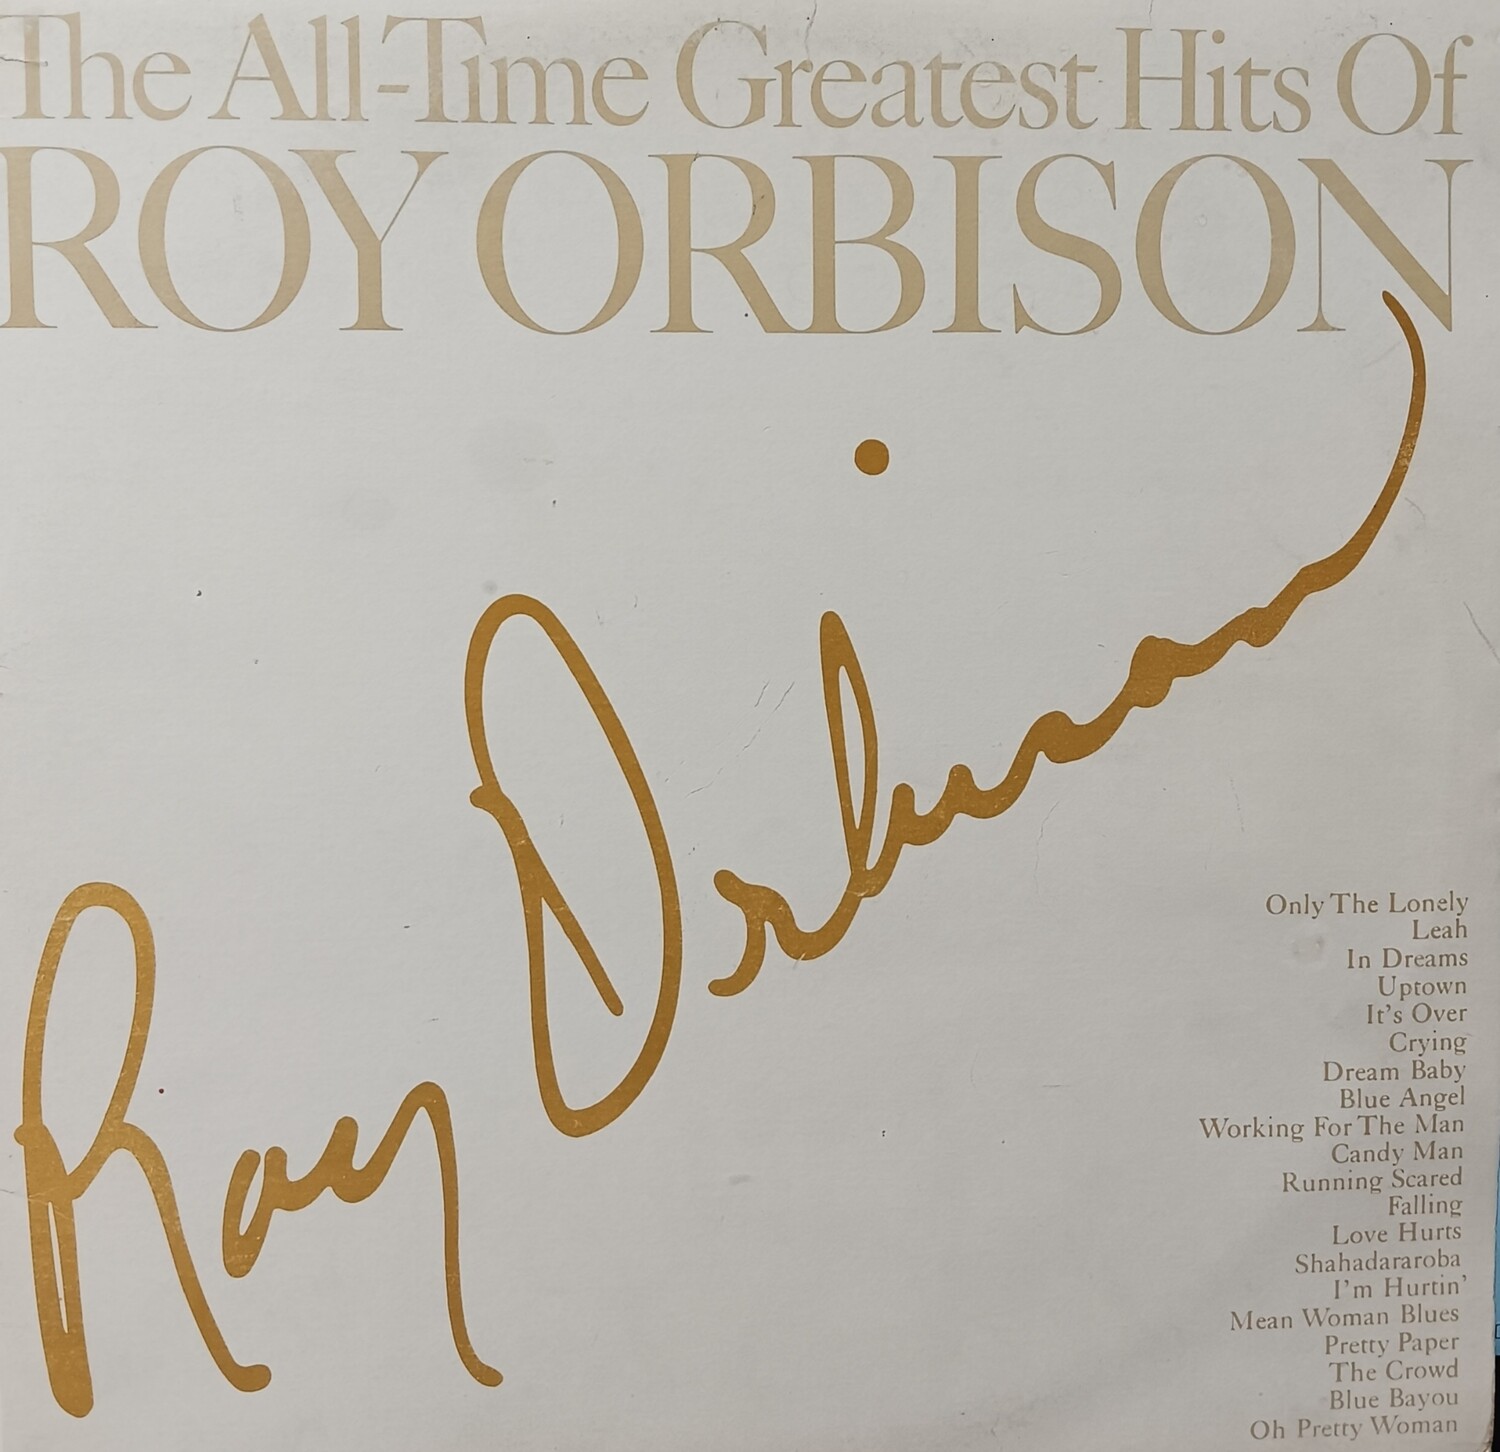 ROY ORBISON - The alltime Greatest Hits